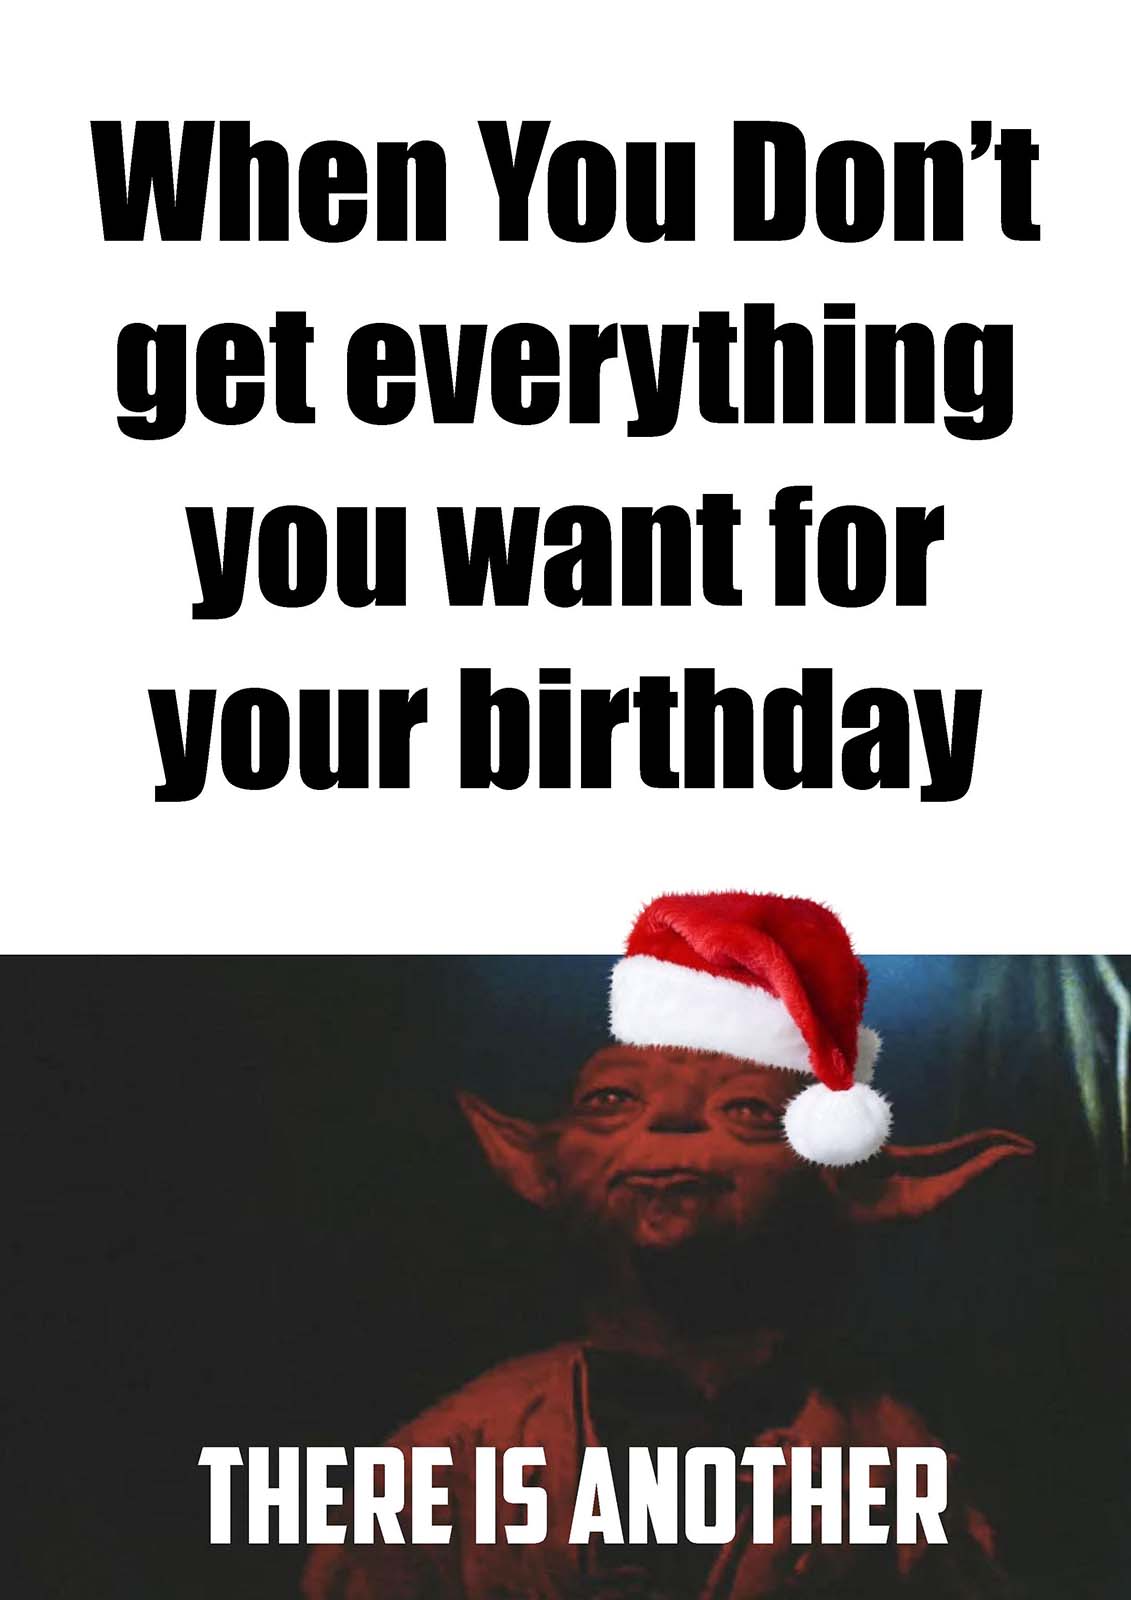 christmas 2020 memes - christmas memes 2020 - When You Don't get everything you want for your birthday There Is Another